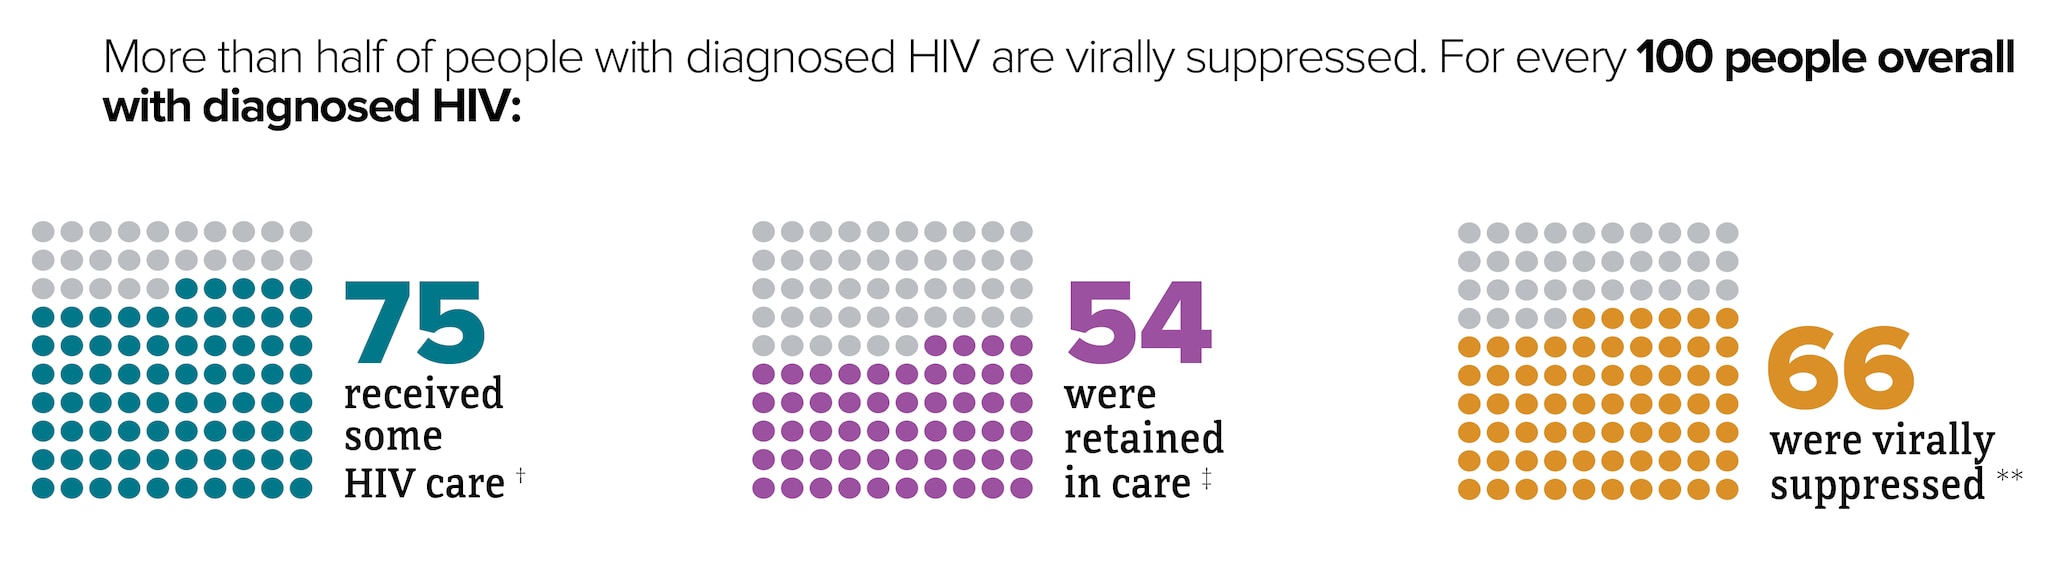 people with diagnosed HIV in the US who received some HIV care, were retained in care, and were virally suppressed.